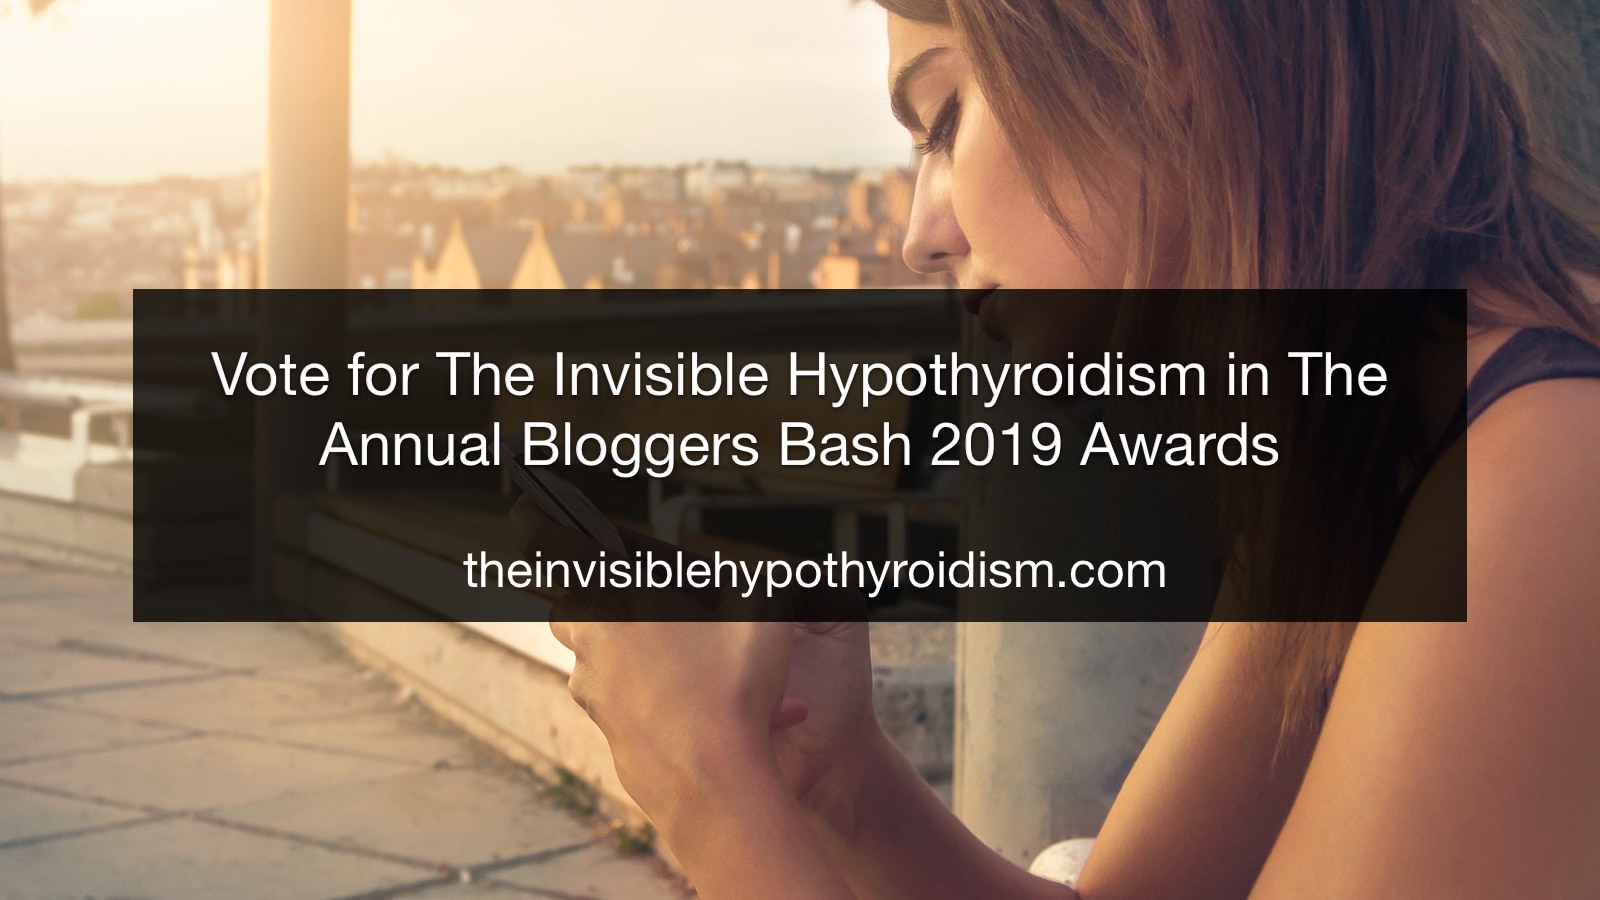 Vote for The Invisible Hypothyroidism in The Annual Bloggers Bash 2019 Awards